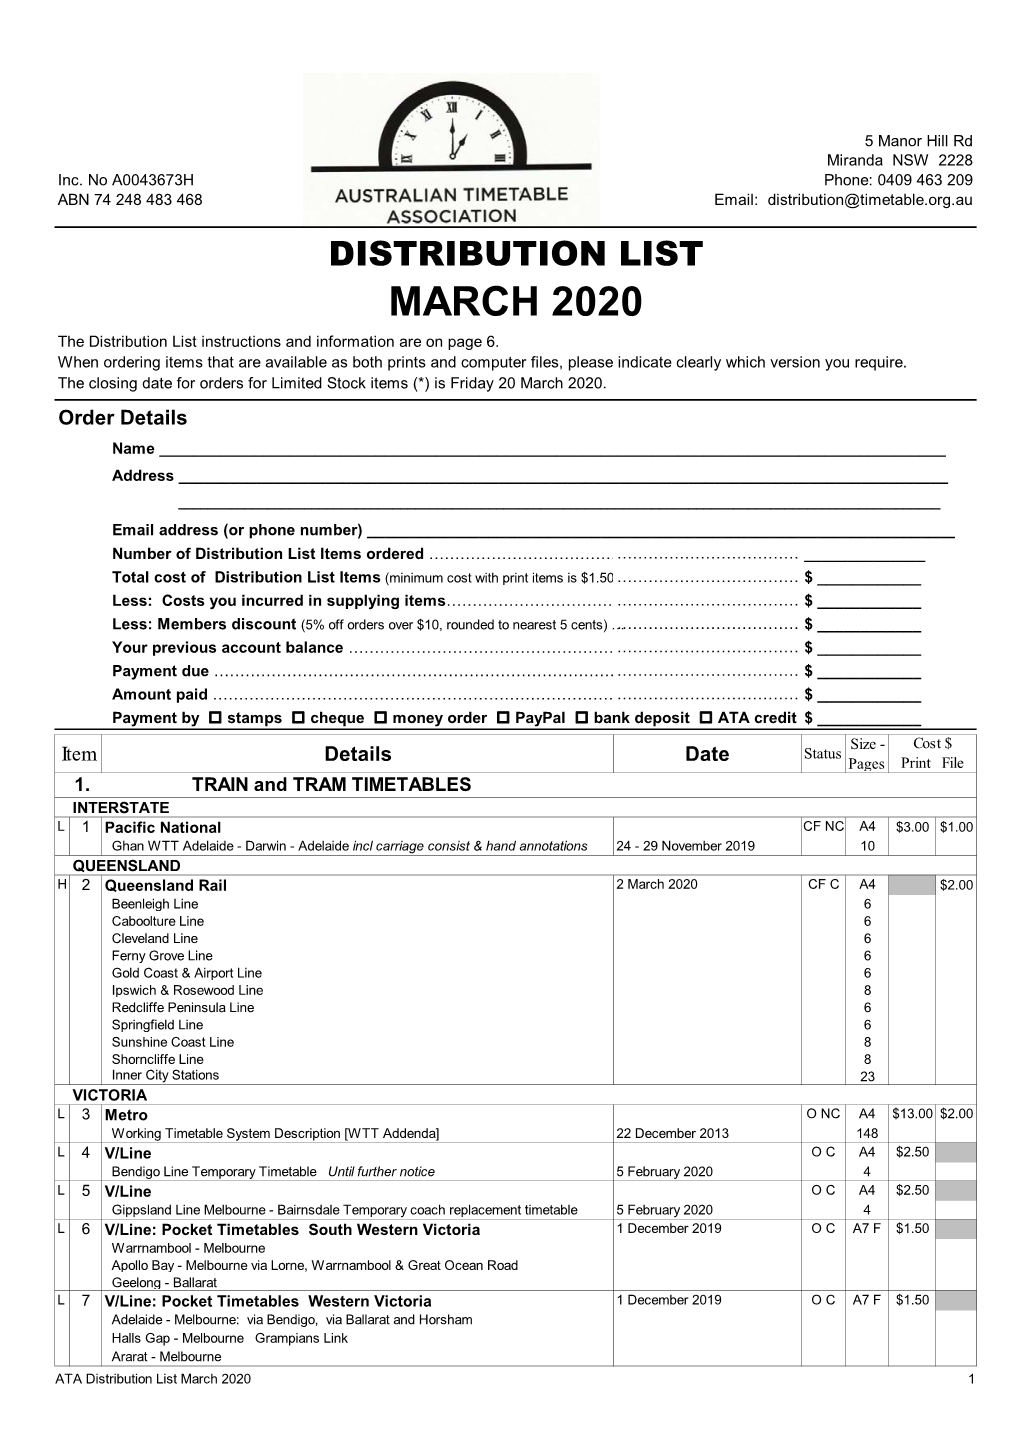 MARCH 2020 the Distribution List Instructions and Information Are on Page 6